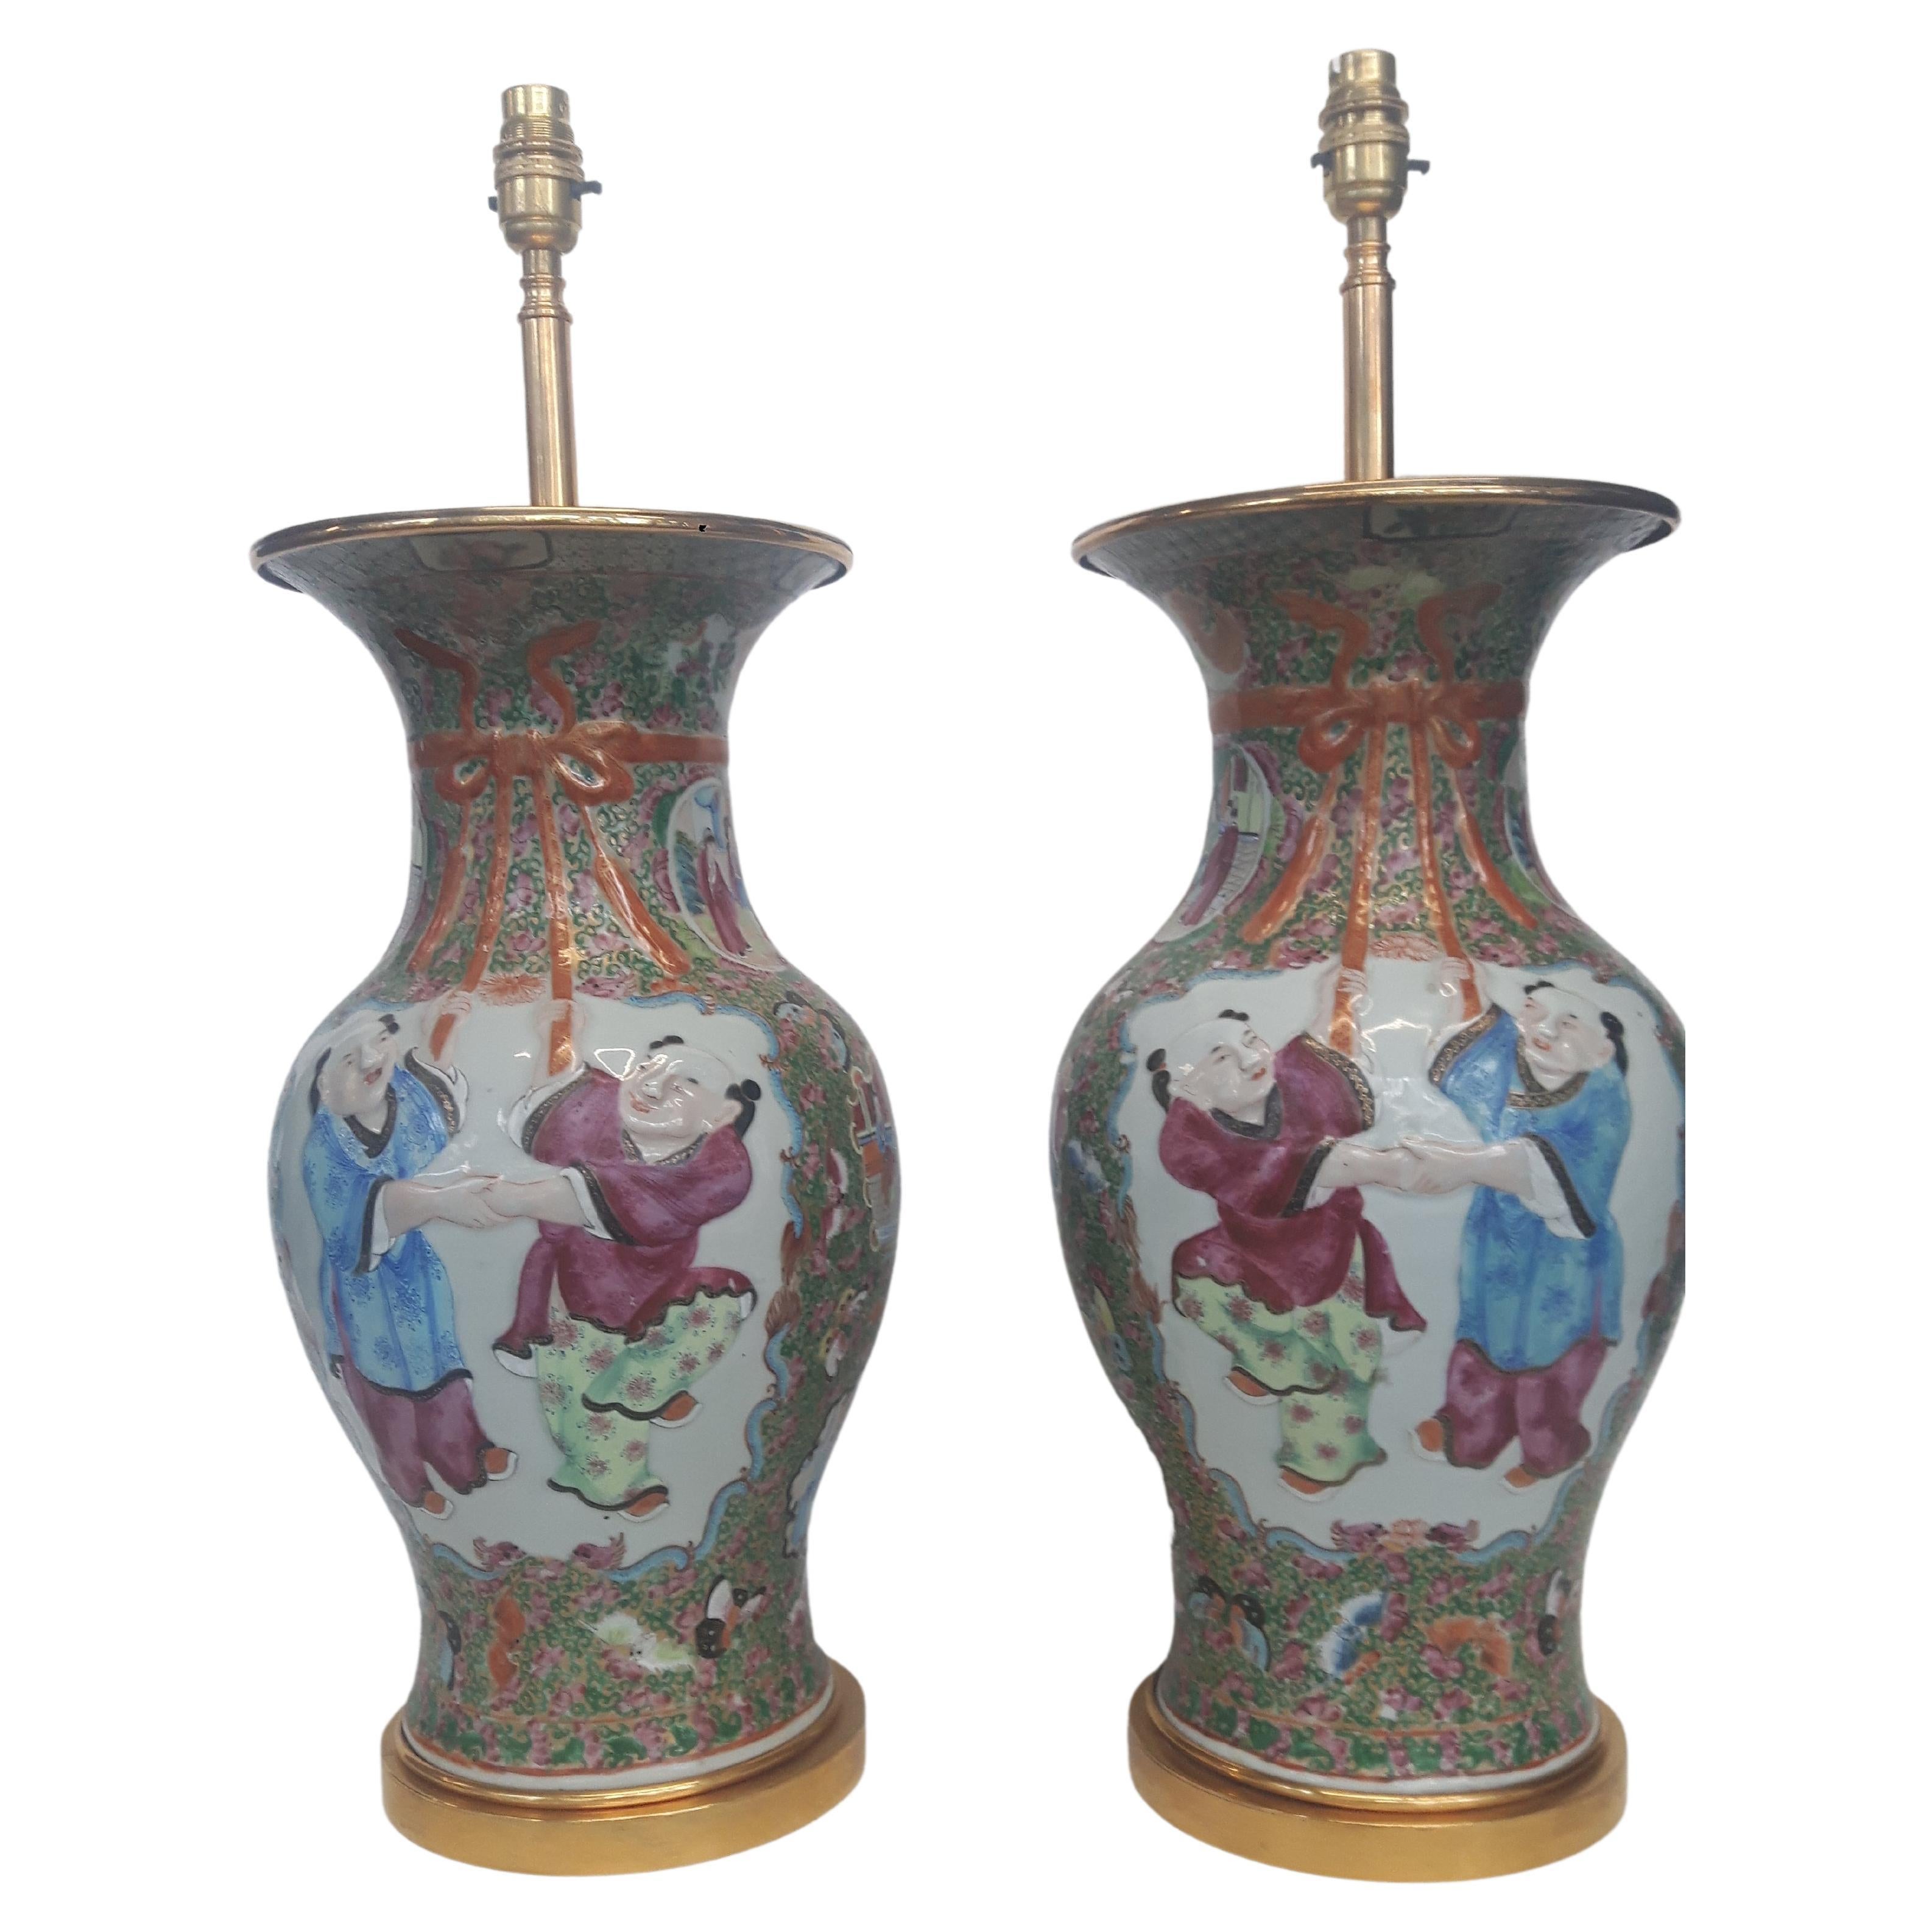 Pair of 19th century Rose medallion vases, converted to lamps